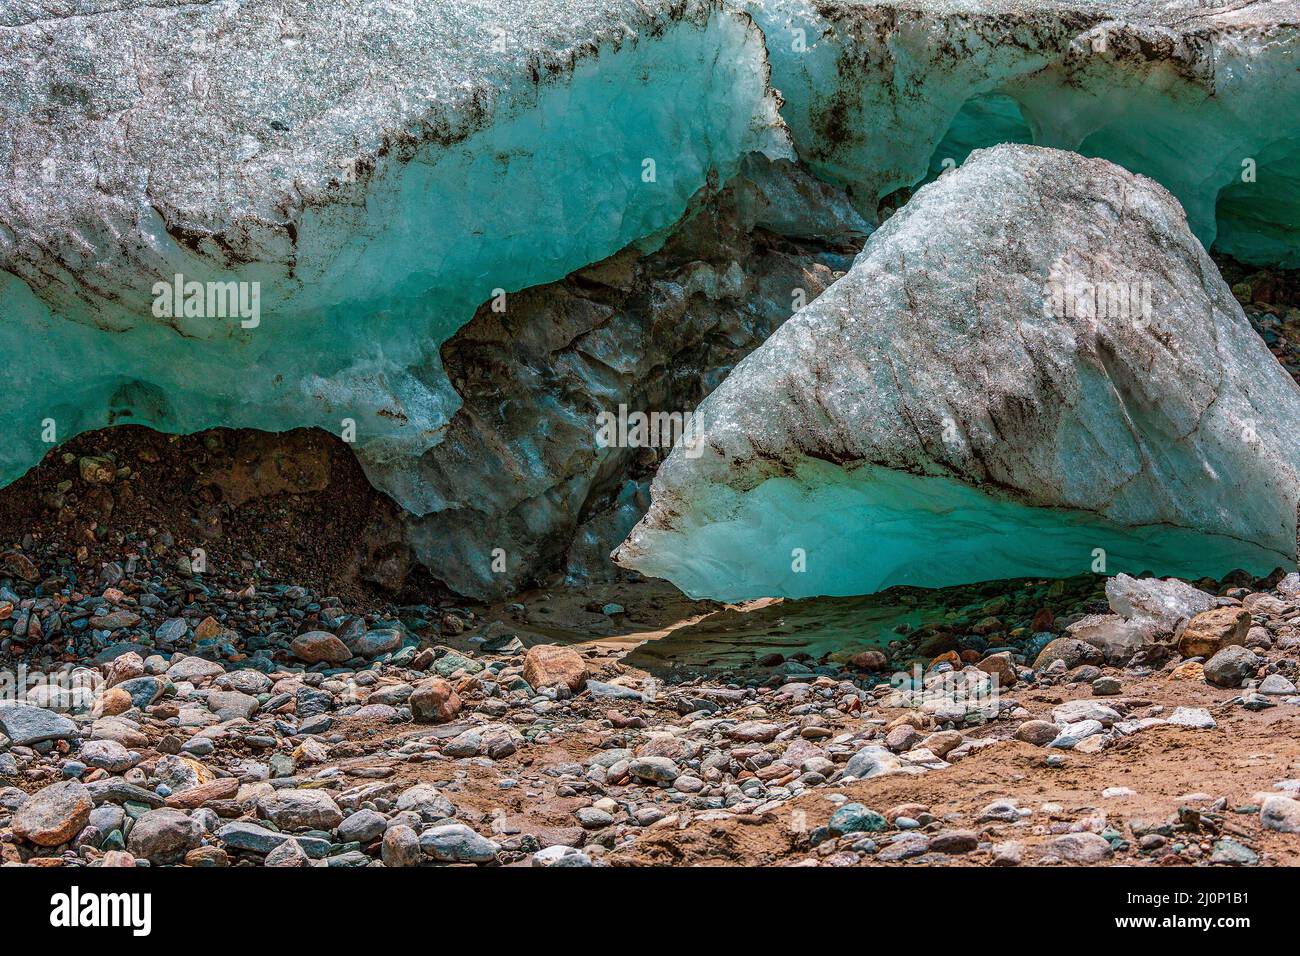 Melting glaciers in the Alps. Stock Photo